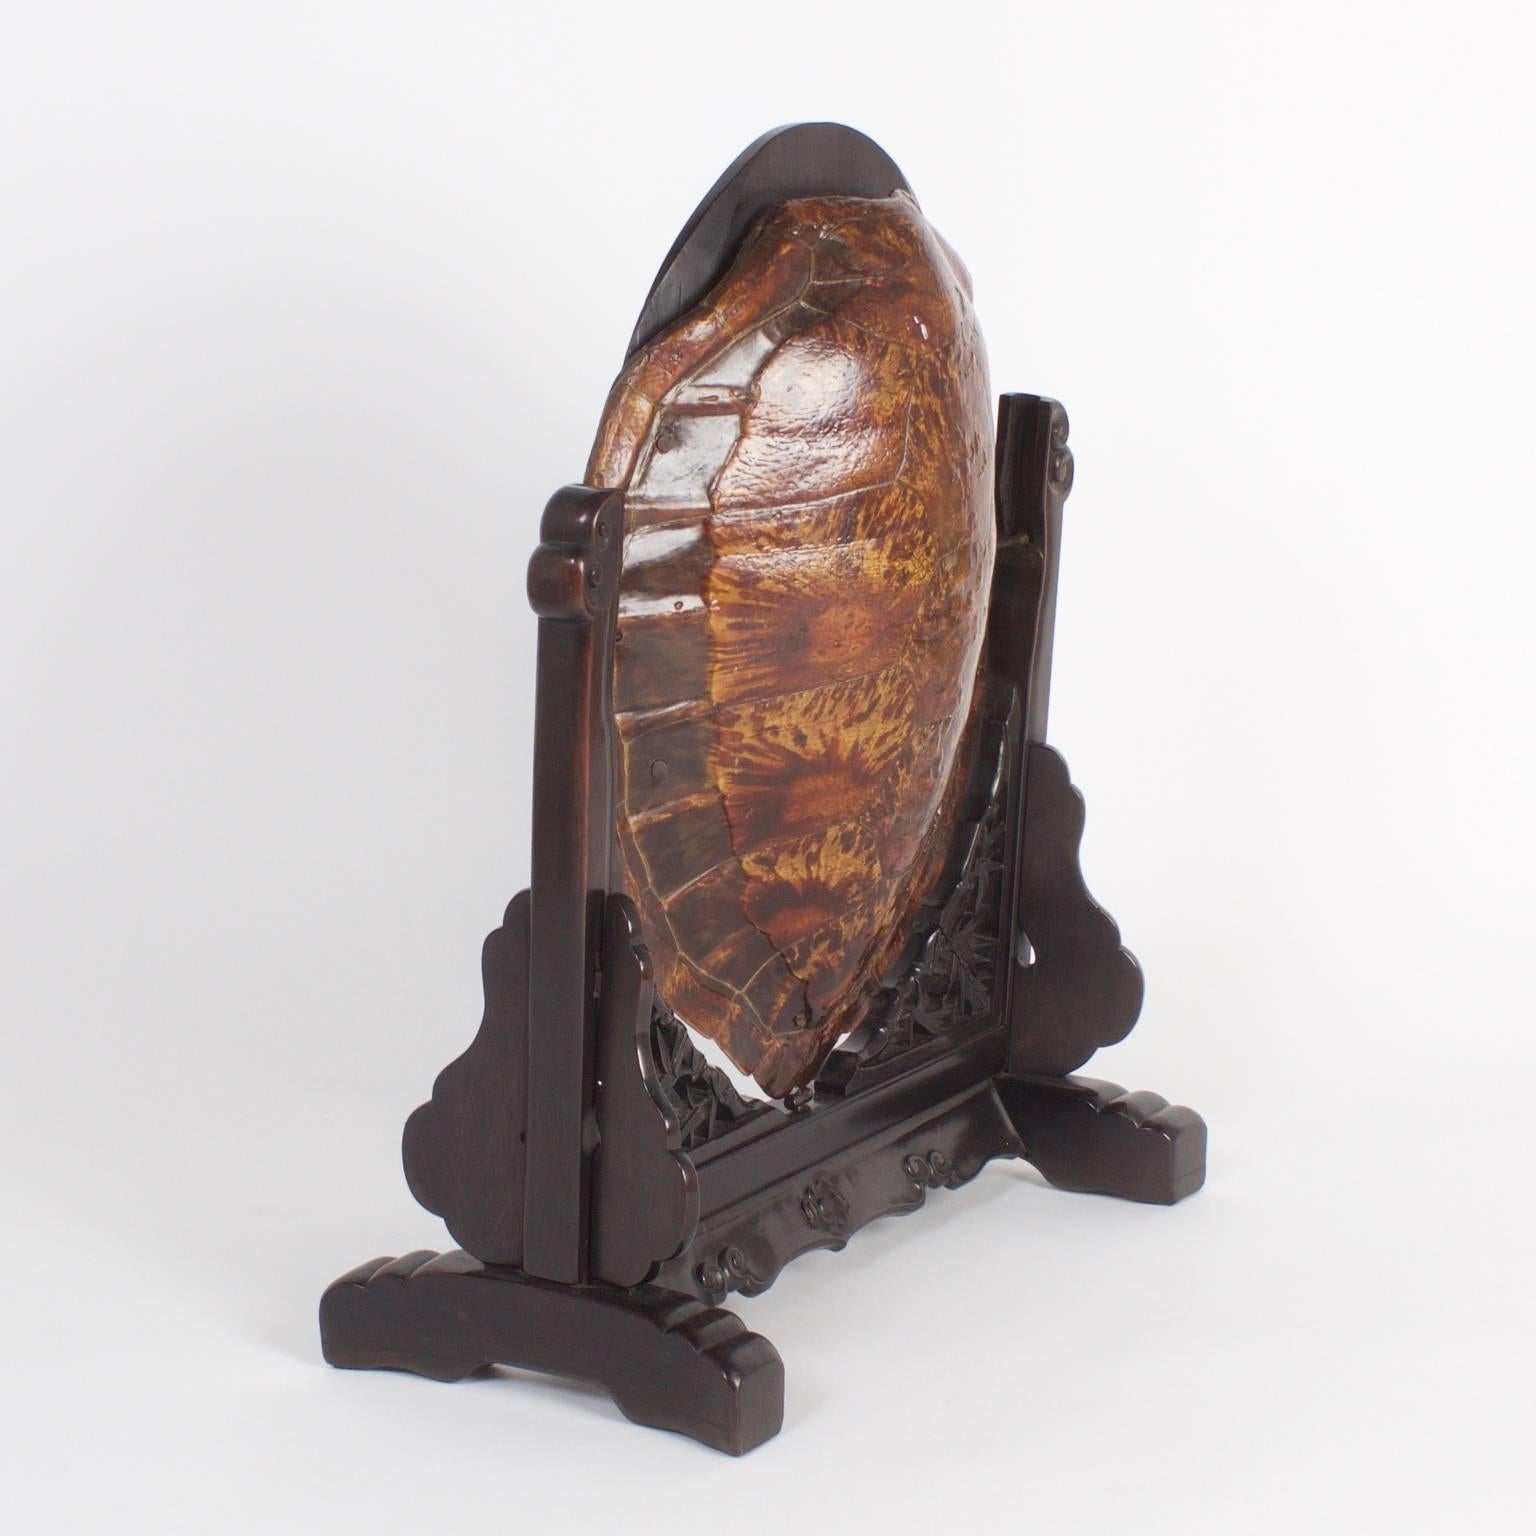 Here is a rare and unusual antique, Chinese vanity mirror presented in a turtle shell. The mirror is in a mahogany frame, expertly carved with lotus flowers and mounted in a carved mahogany stand. We will all probably never see another object of art